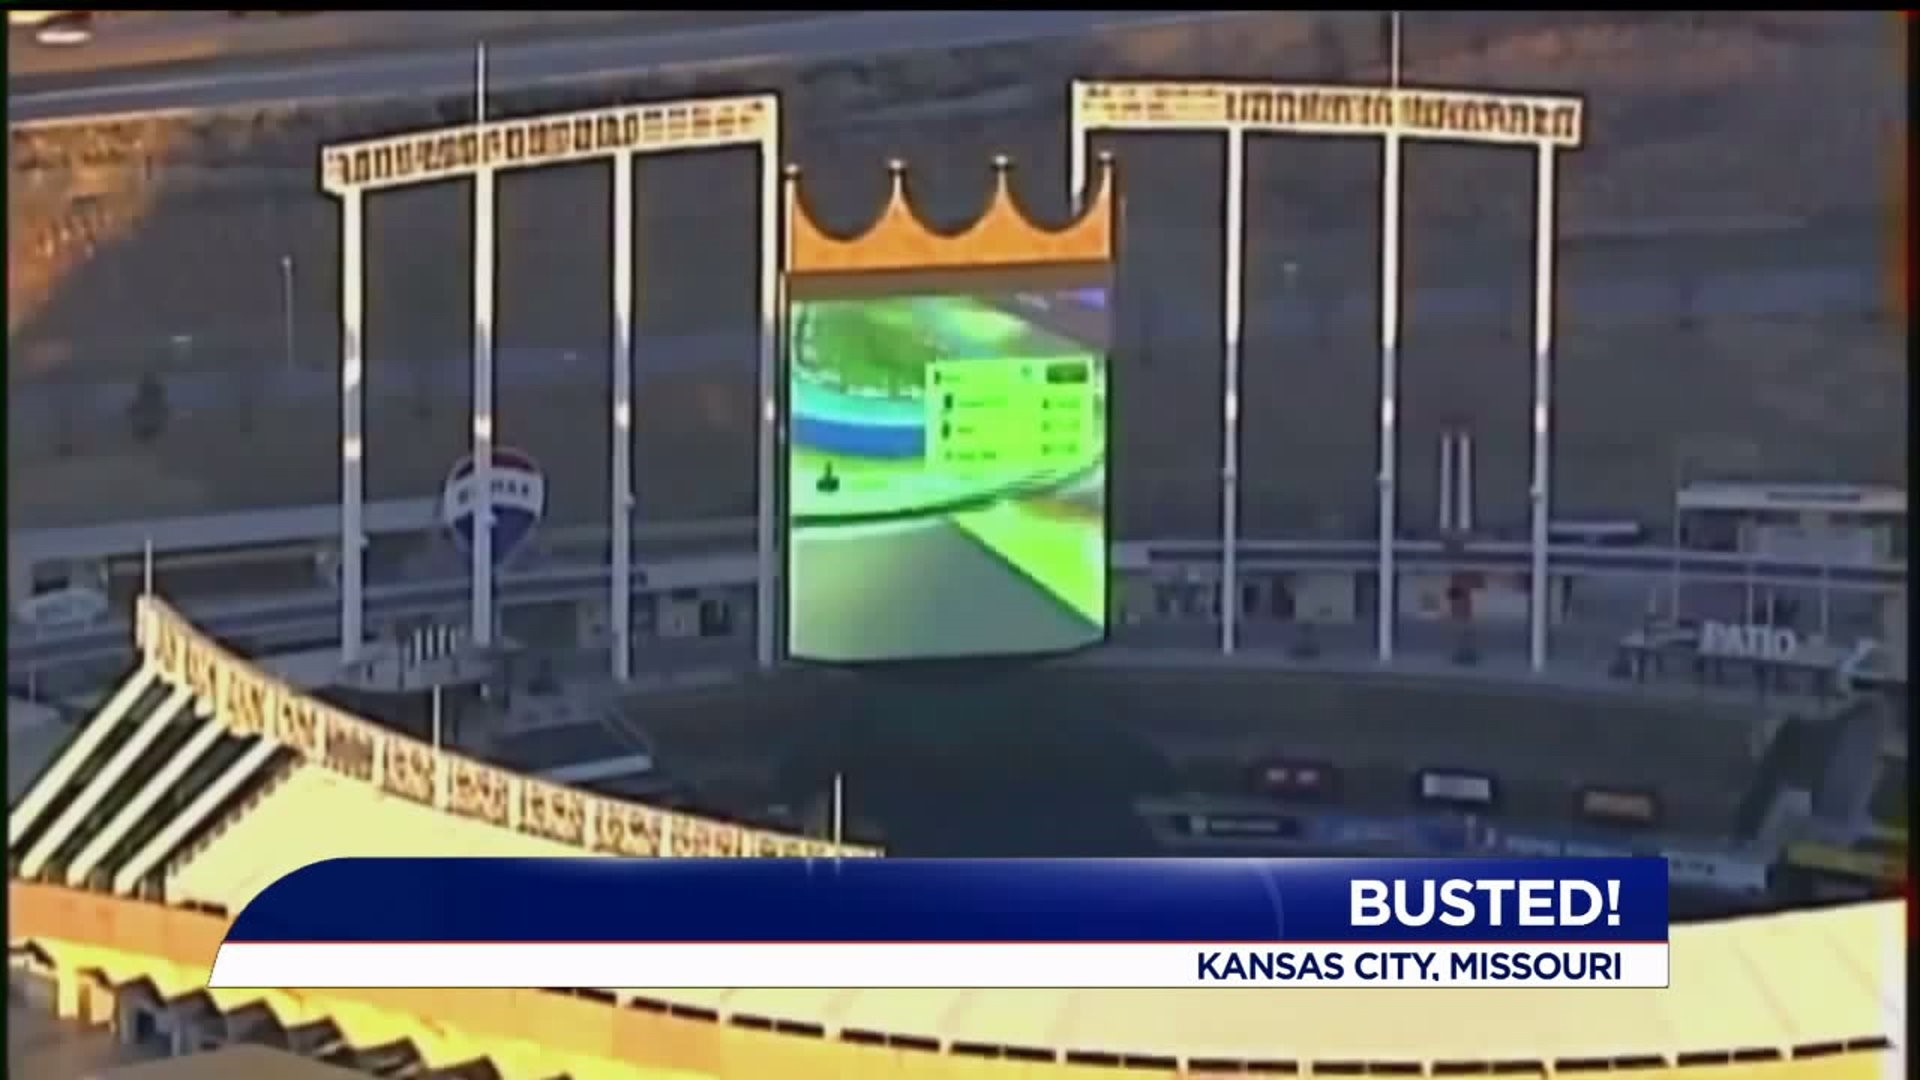 Busted - someone was playing Mario Kart on this stadium screen